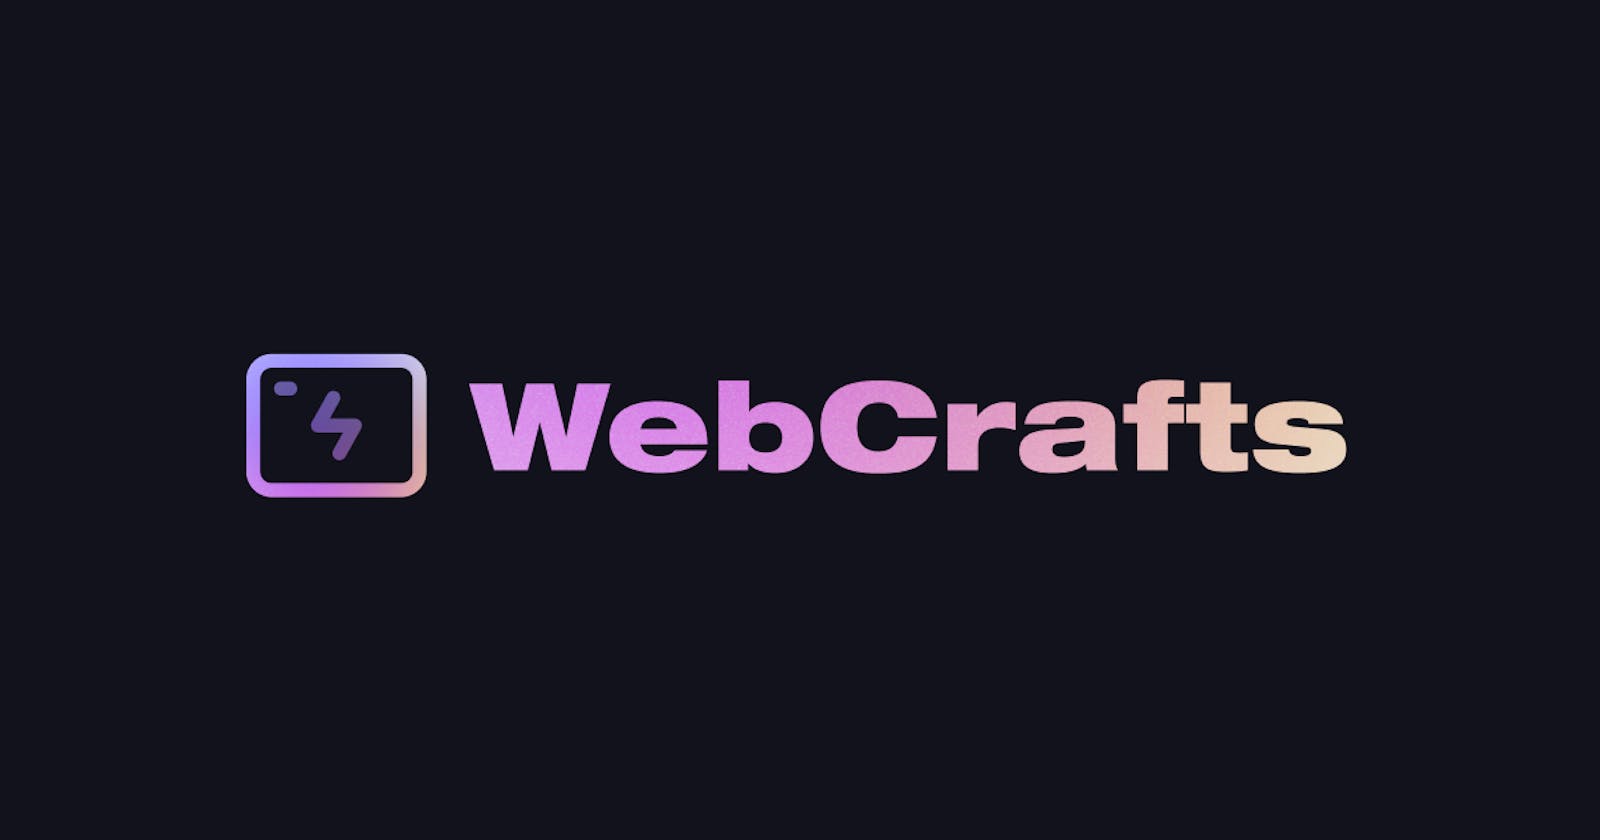 Web Crafts  - The Heart of the
Web Developer Community